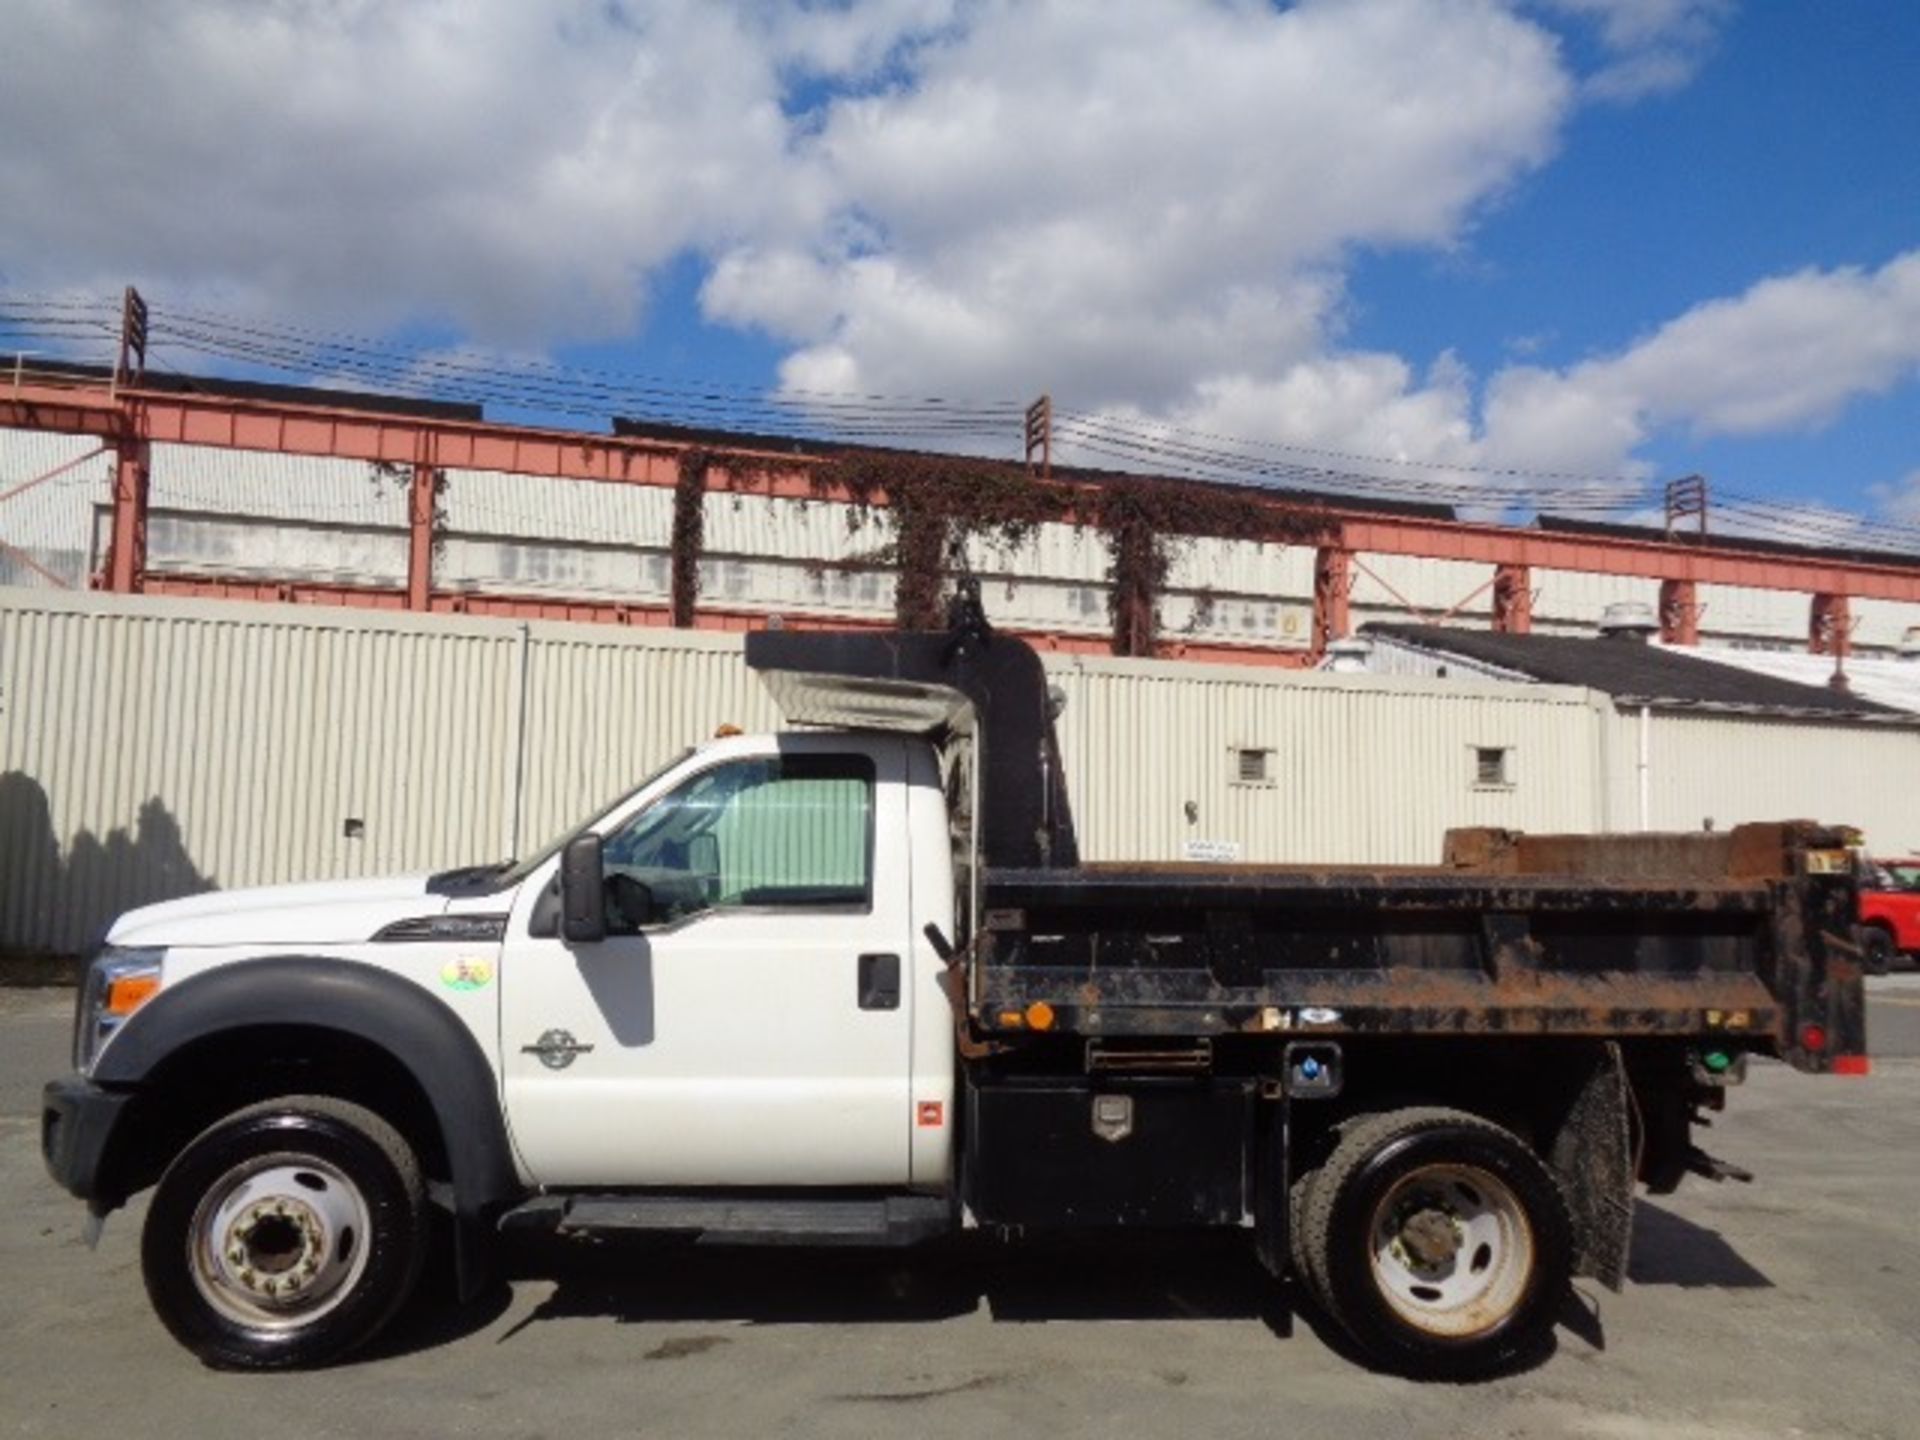 2012 Ford F550 Dump Truck - Image 6 of 19